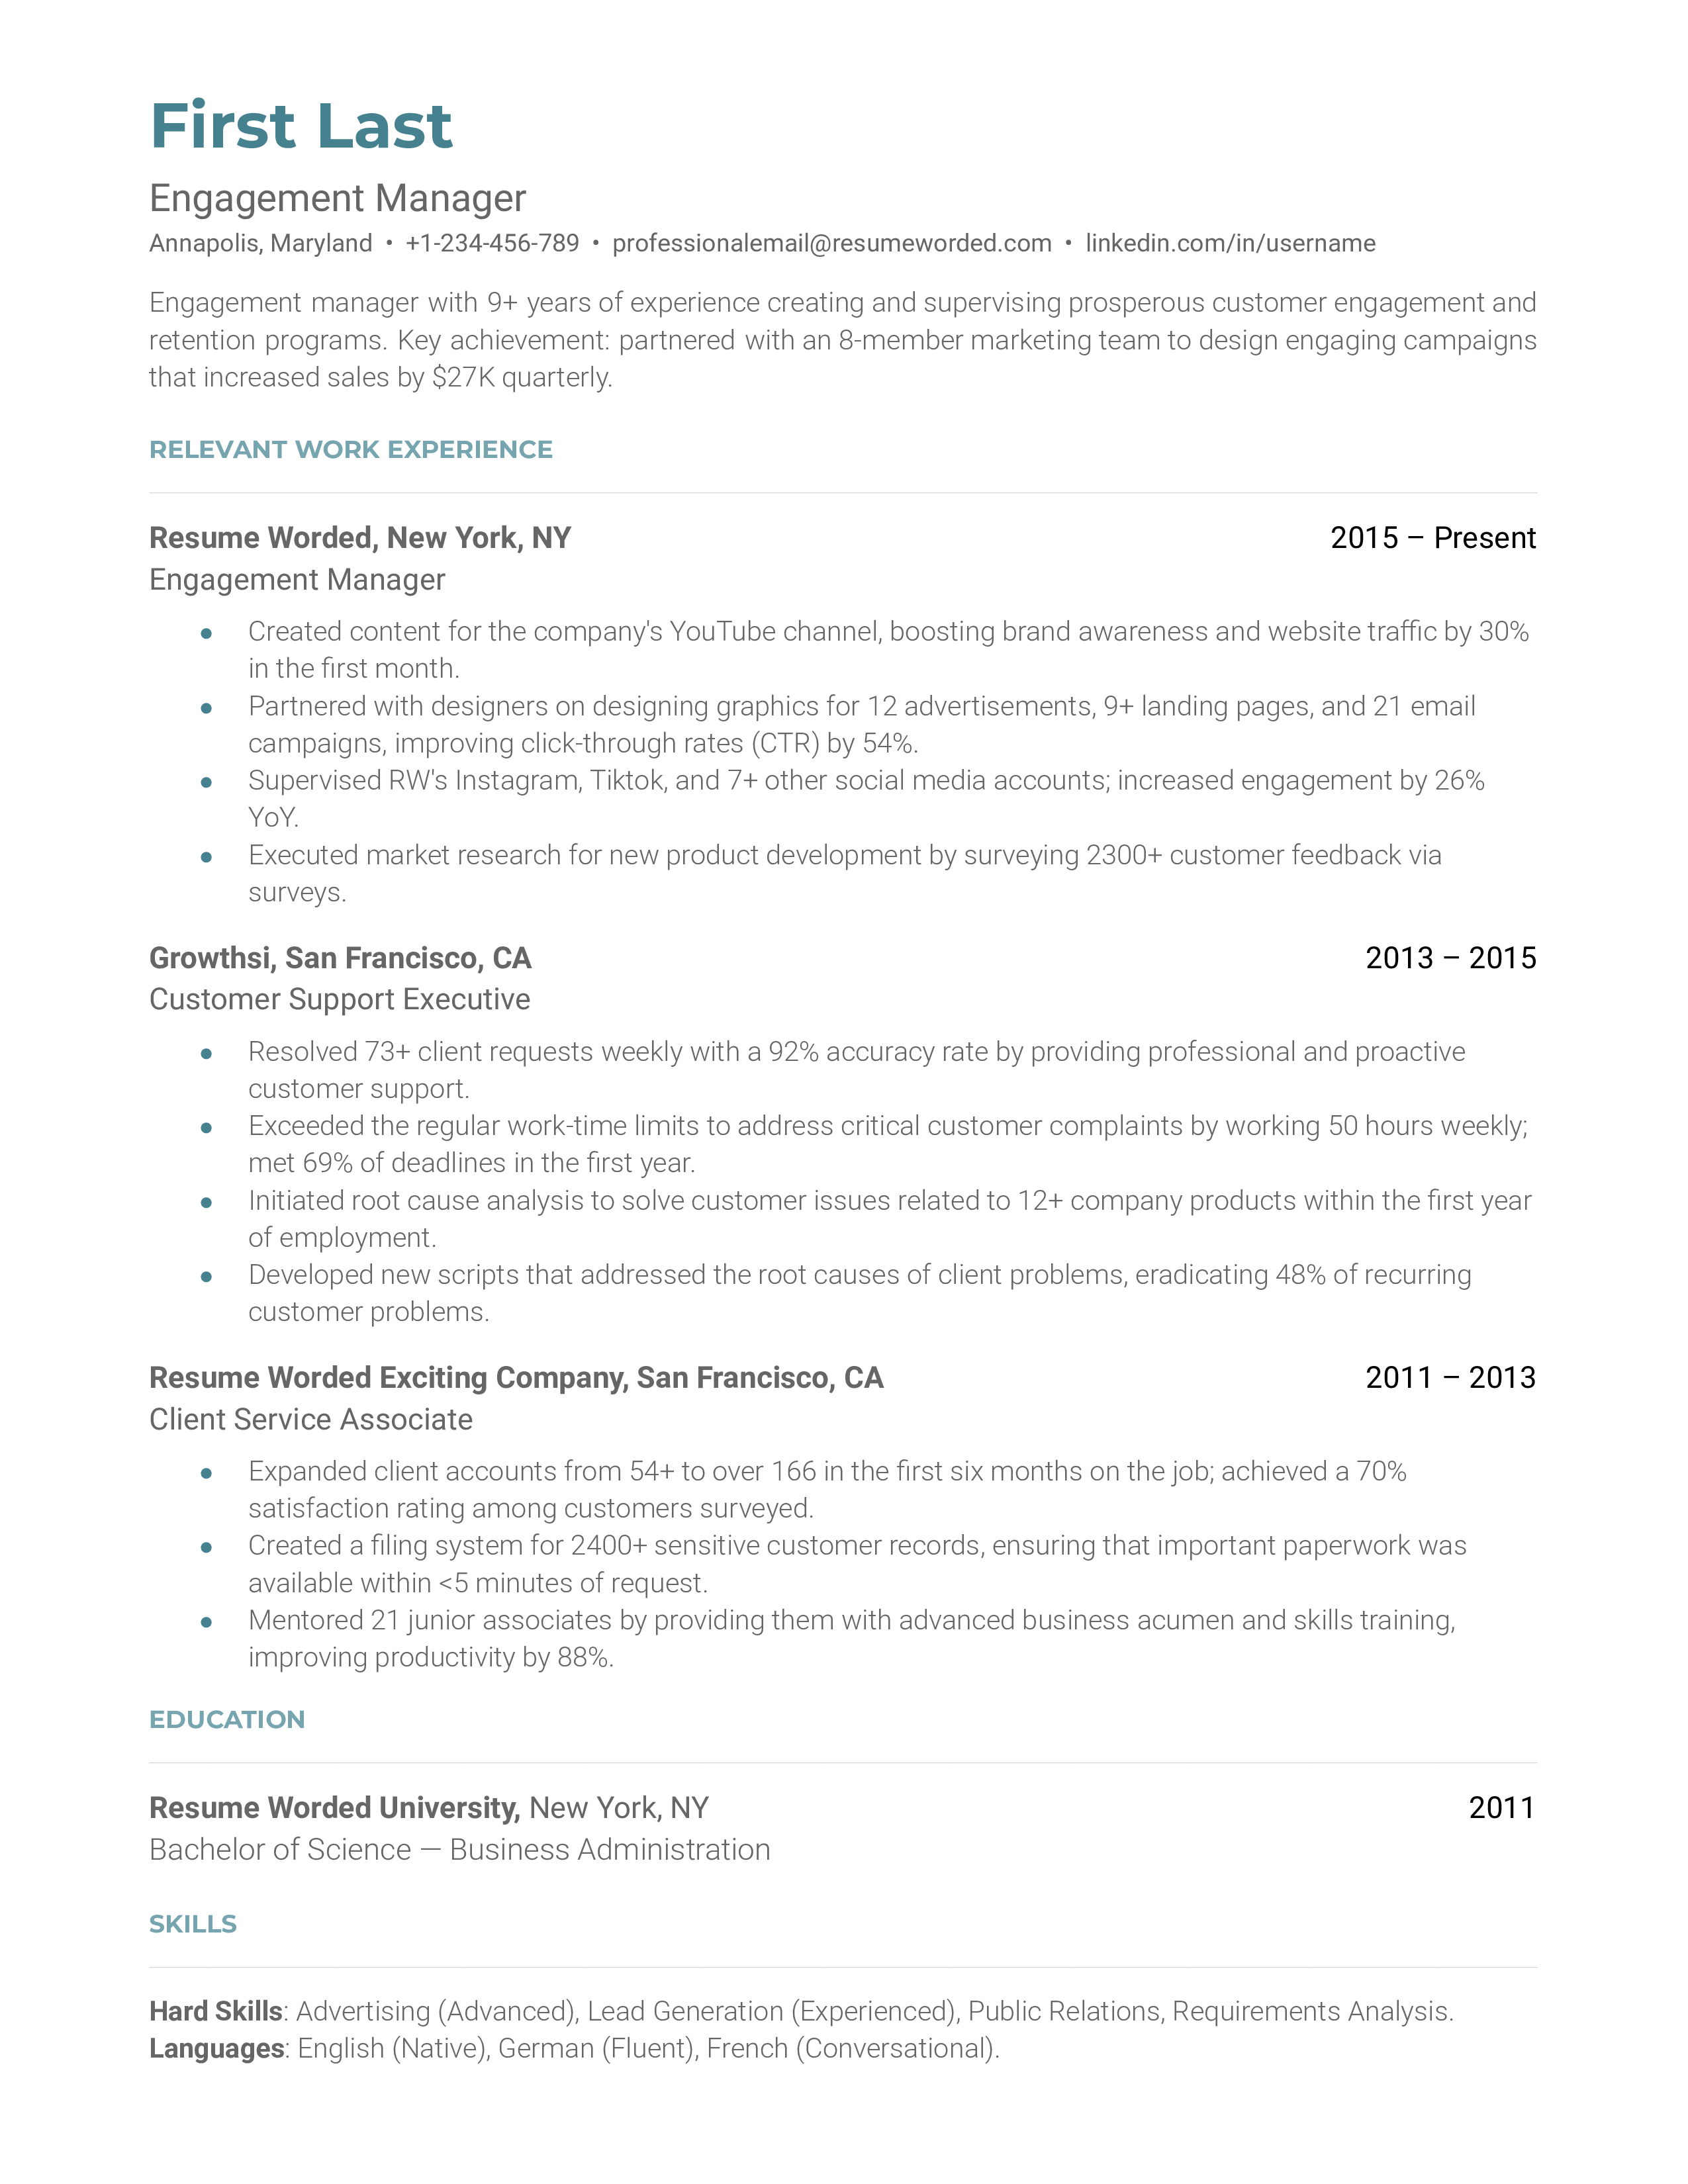 An engagement manager resume template that highlights in-demand technical skills.